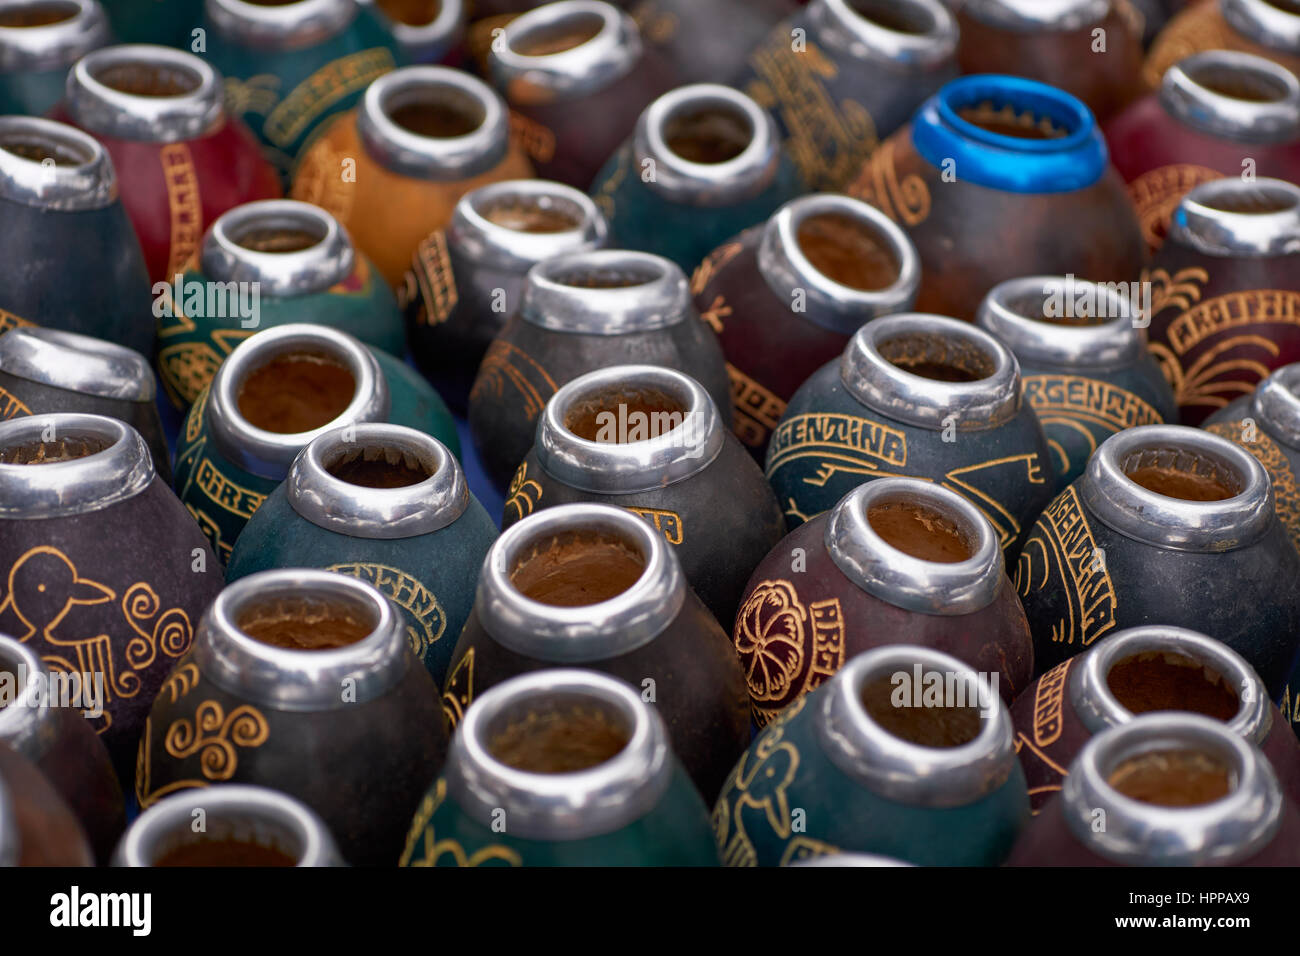 Mate gourds for sale as popular traditional souvenirs in the Feria de San Telmo market, Buenos Aires, Argentina Stock Photo